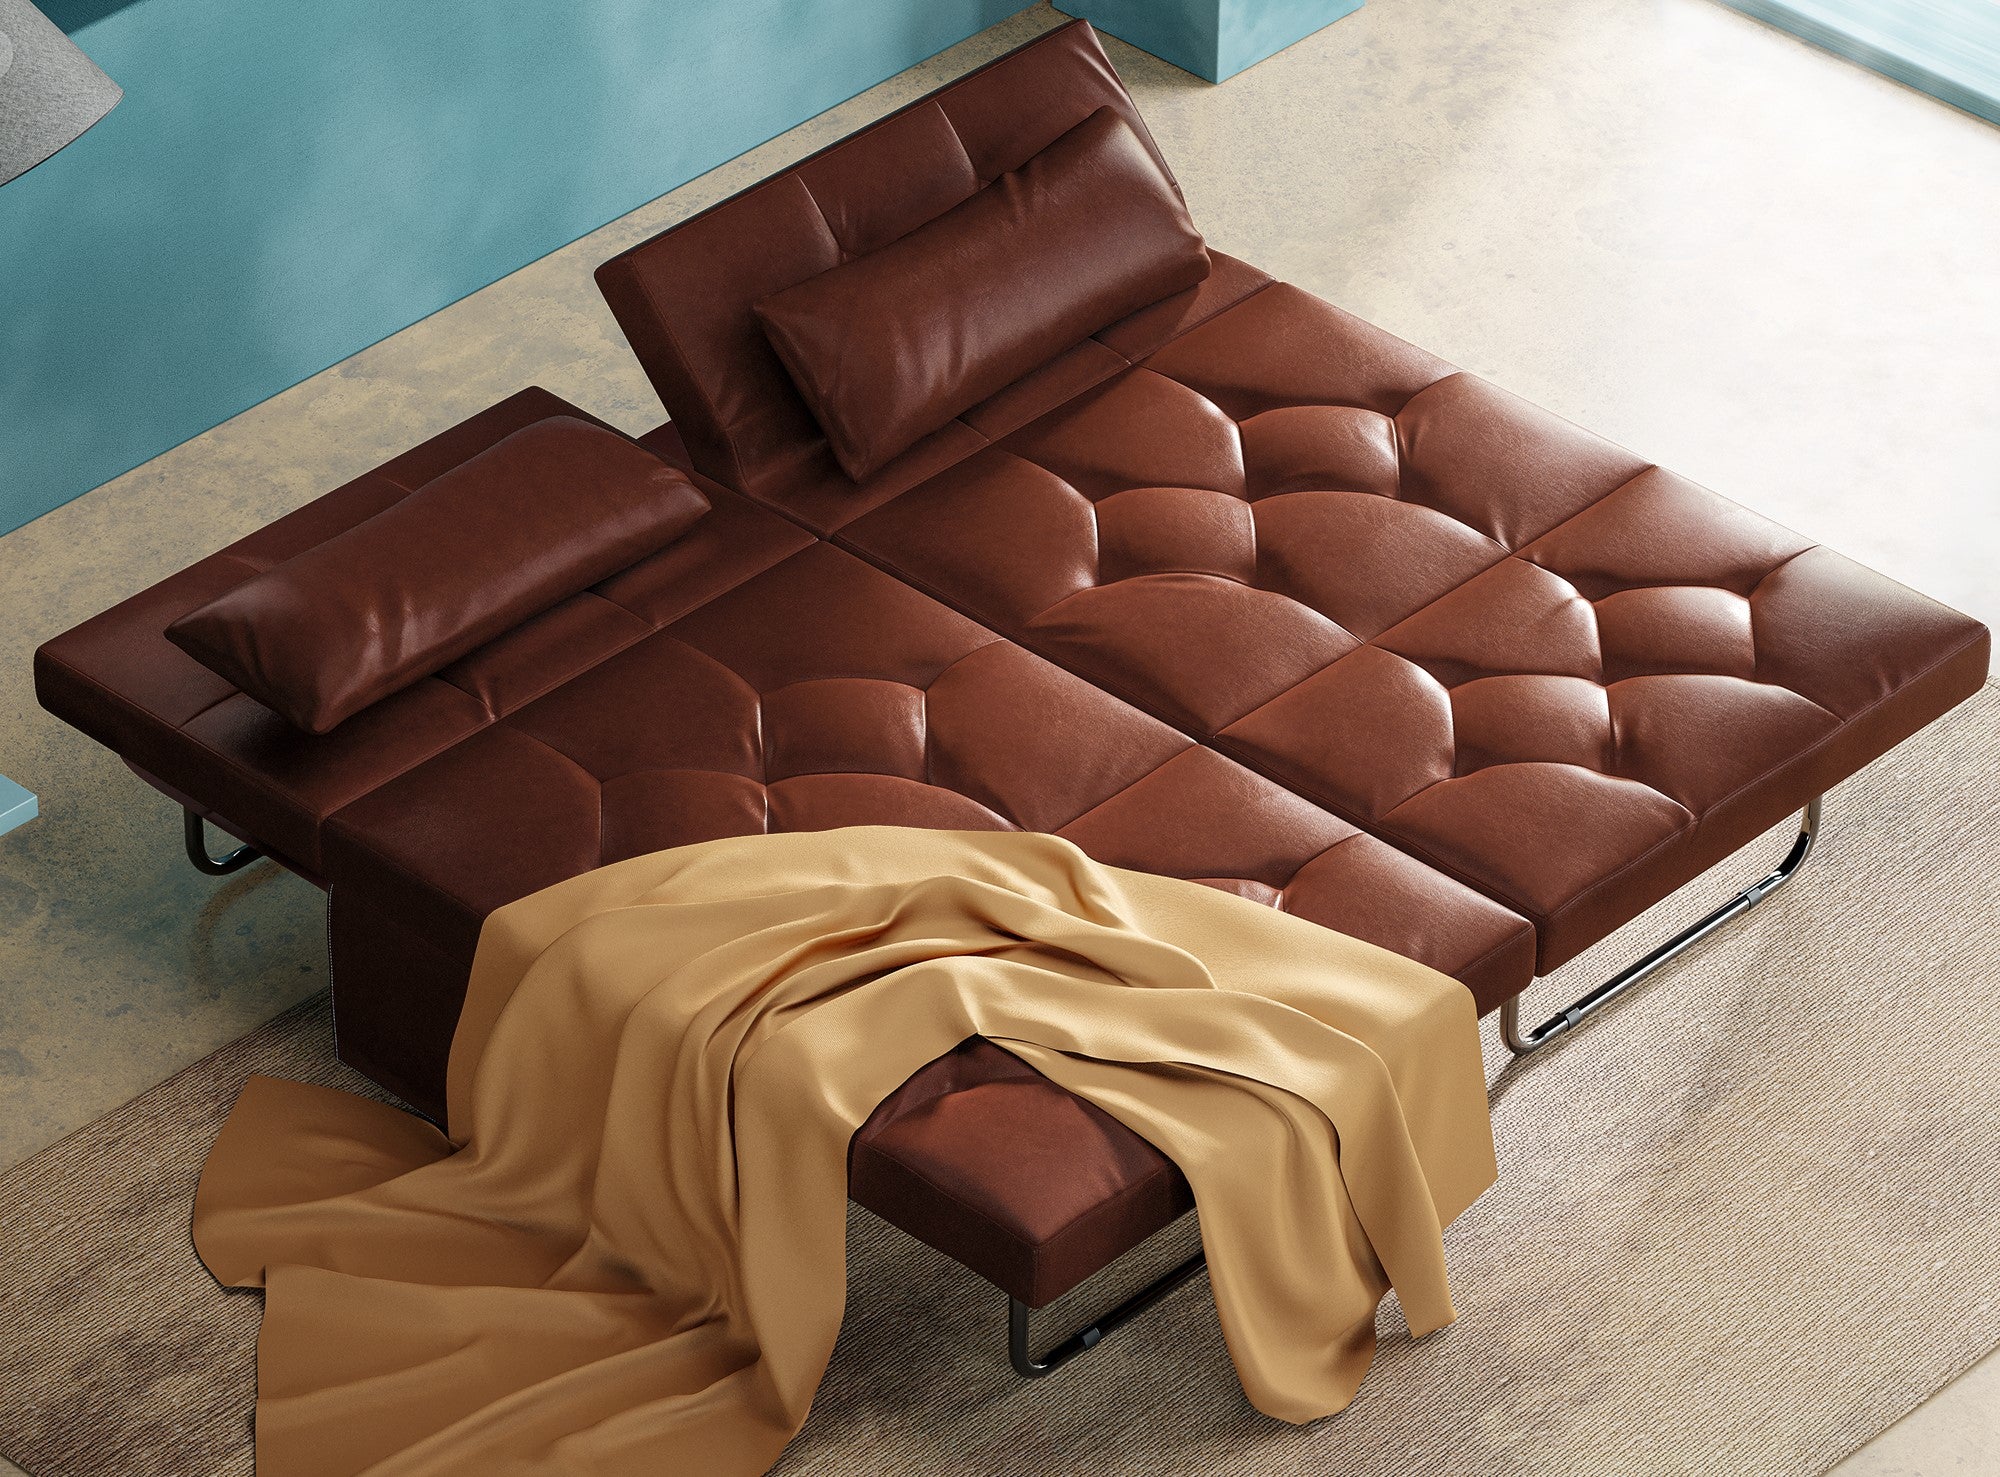 The sofa bed can be used as a single bed when unfolded.